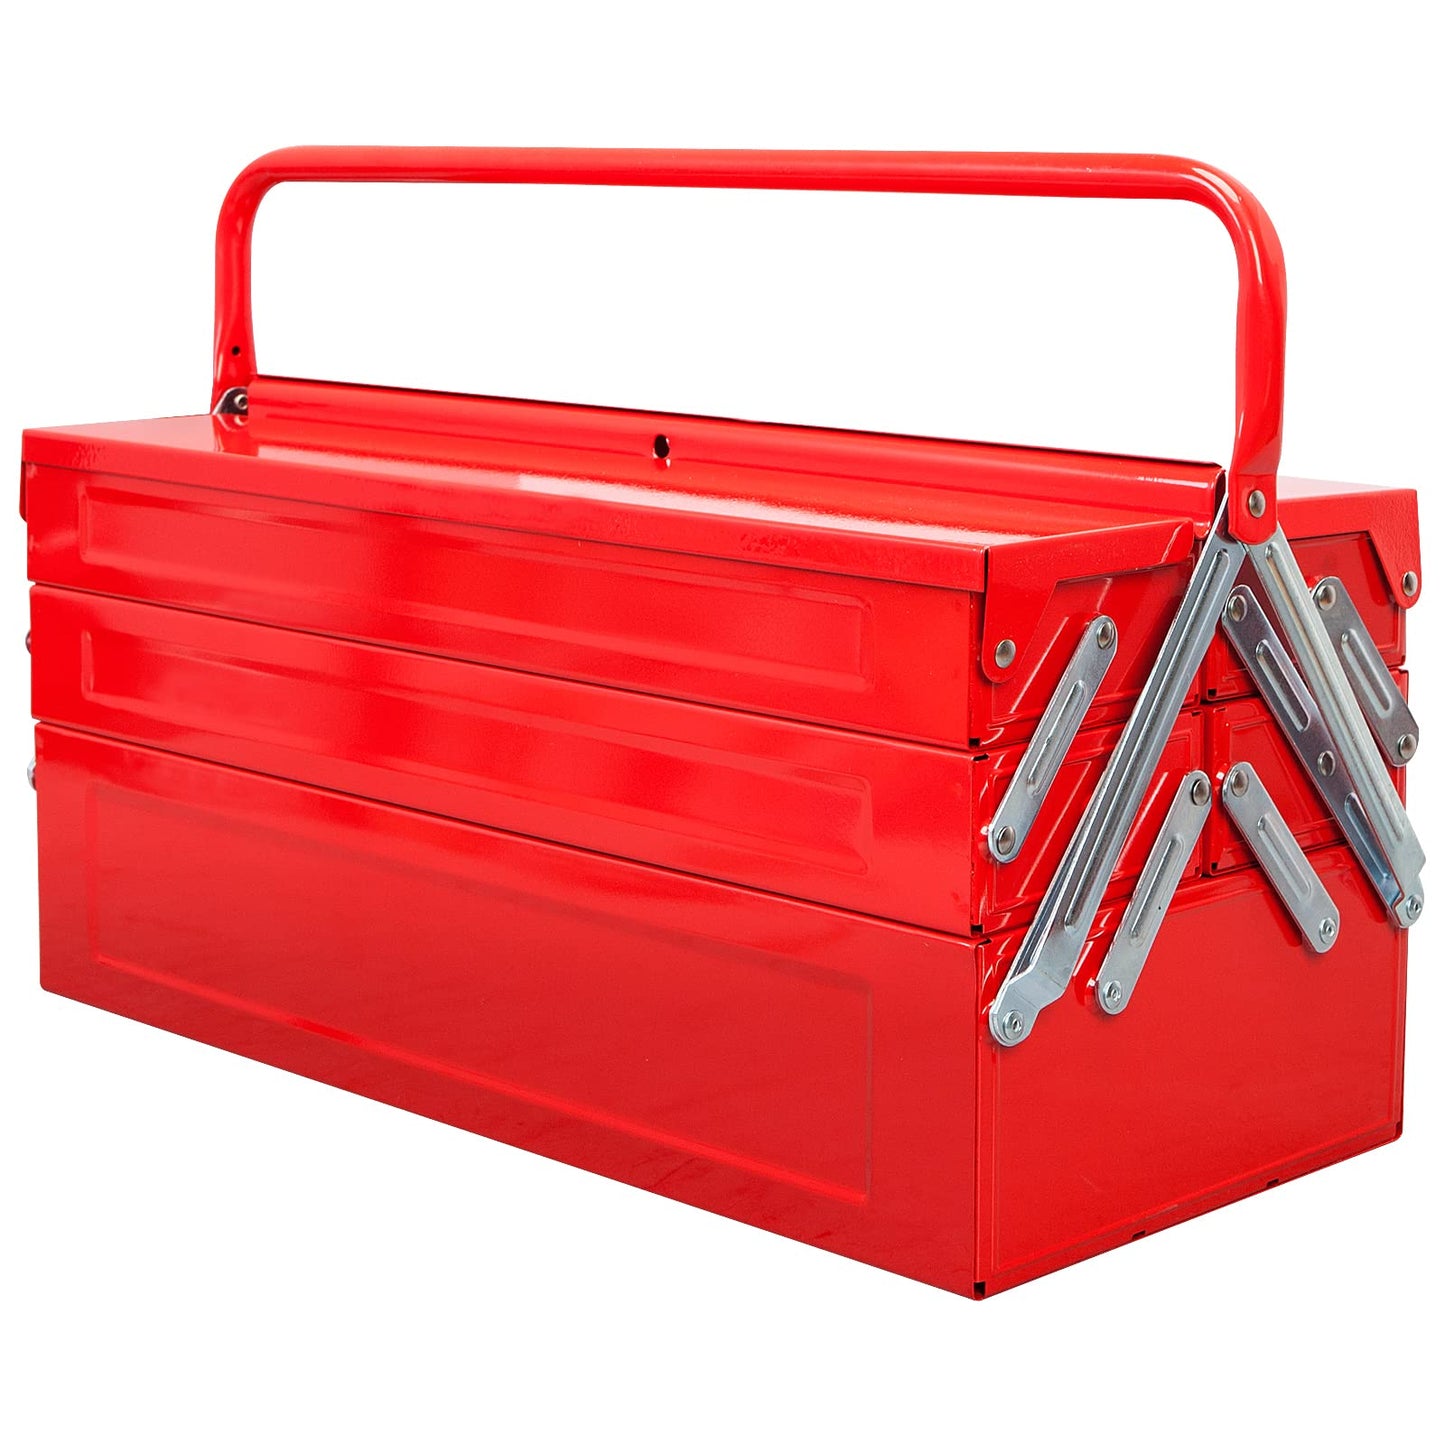 TCE 18" Metal Tool Box, Portable Steel Tool Cabinet with 5 Cantilever Tool Trays,ANTBC-128U,Red